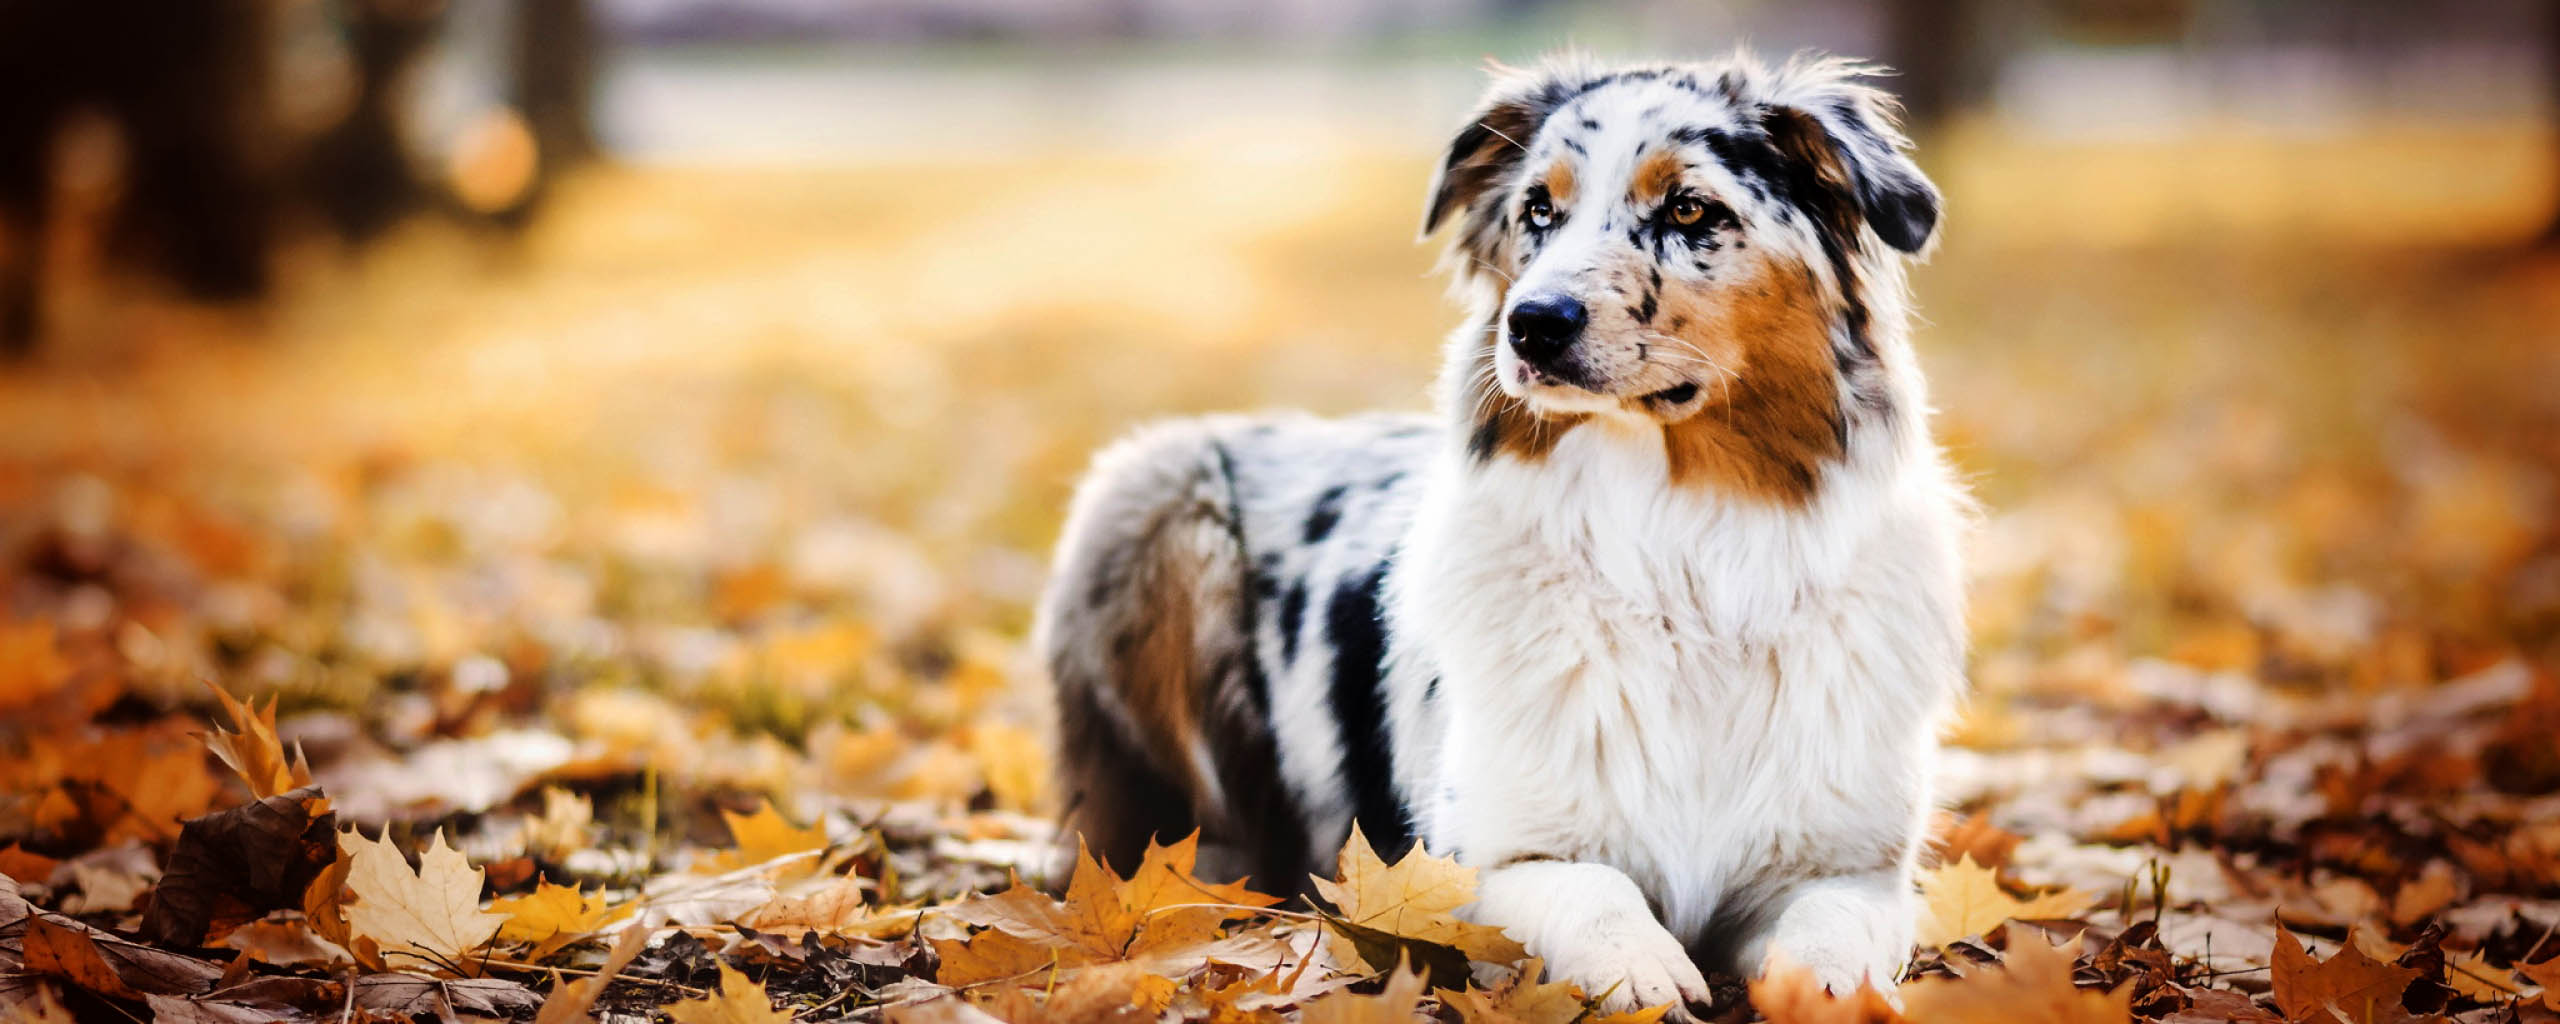 Australian Shepherds sitting on a pile of leaves in the Autumn